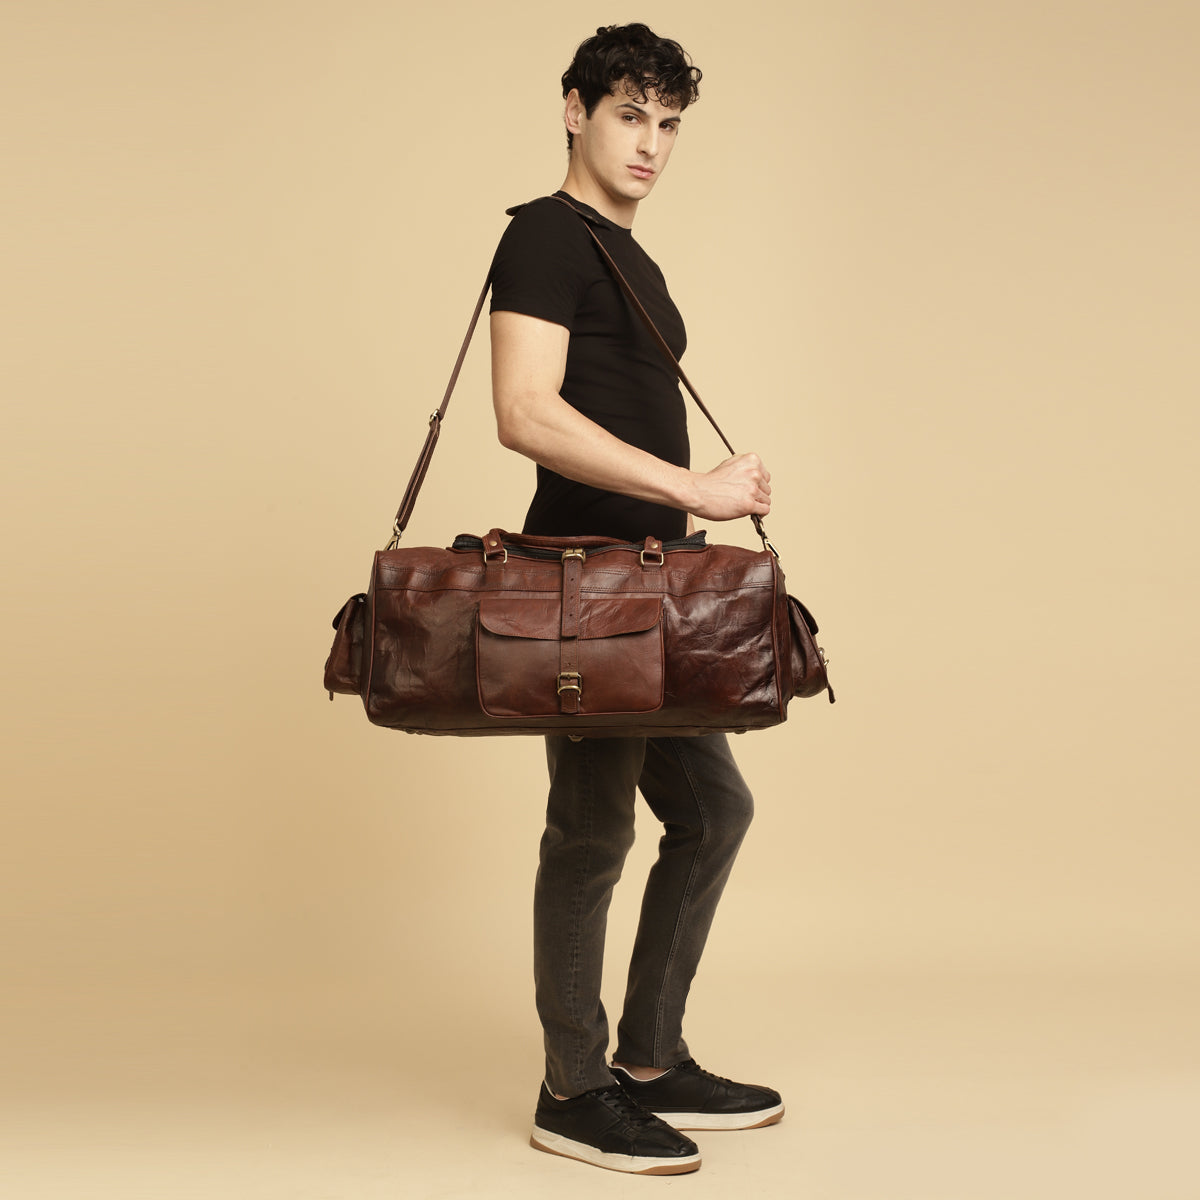 stylish Model with Red leather duffle bag